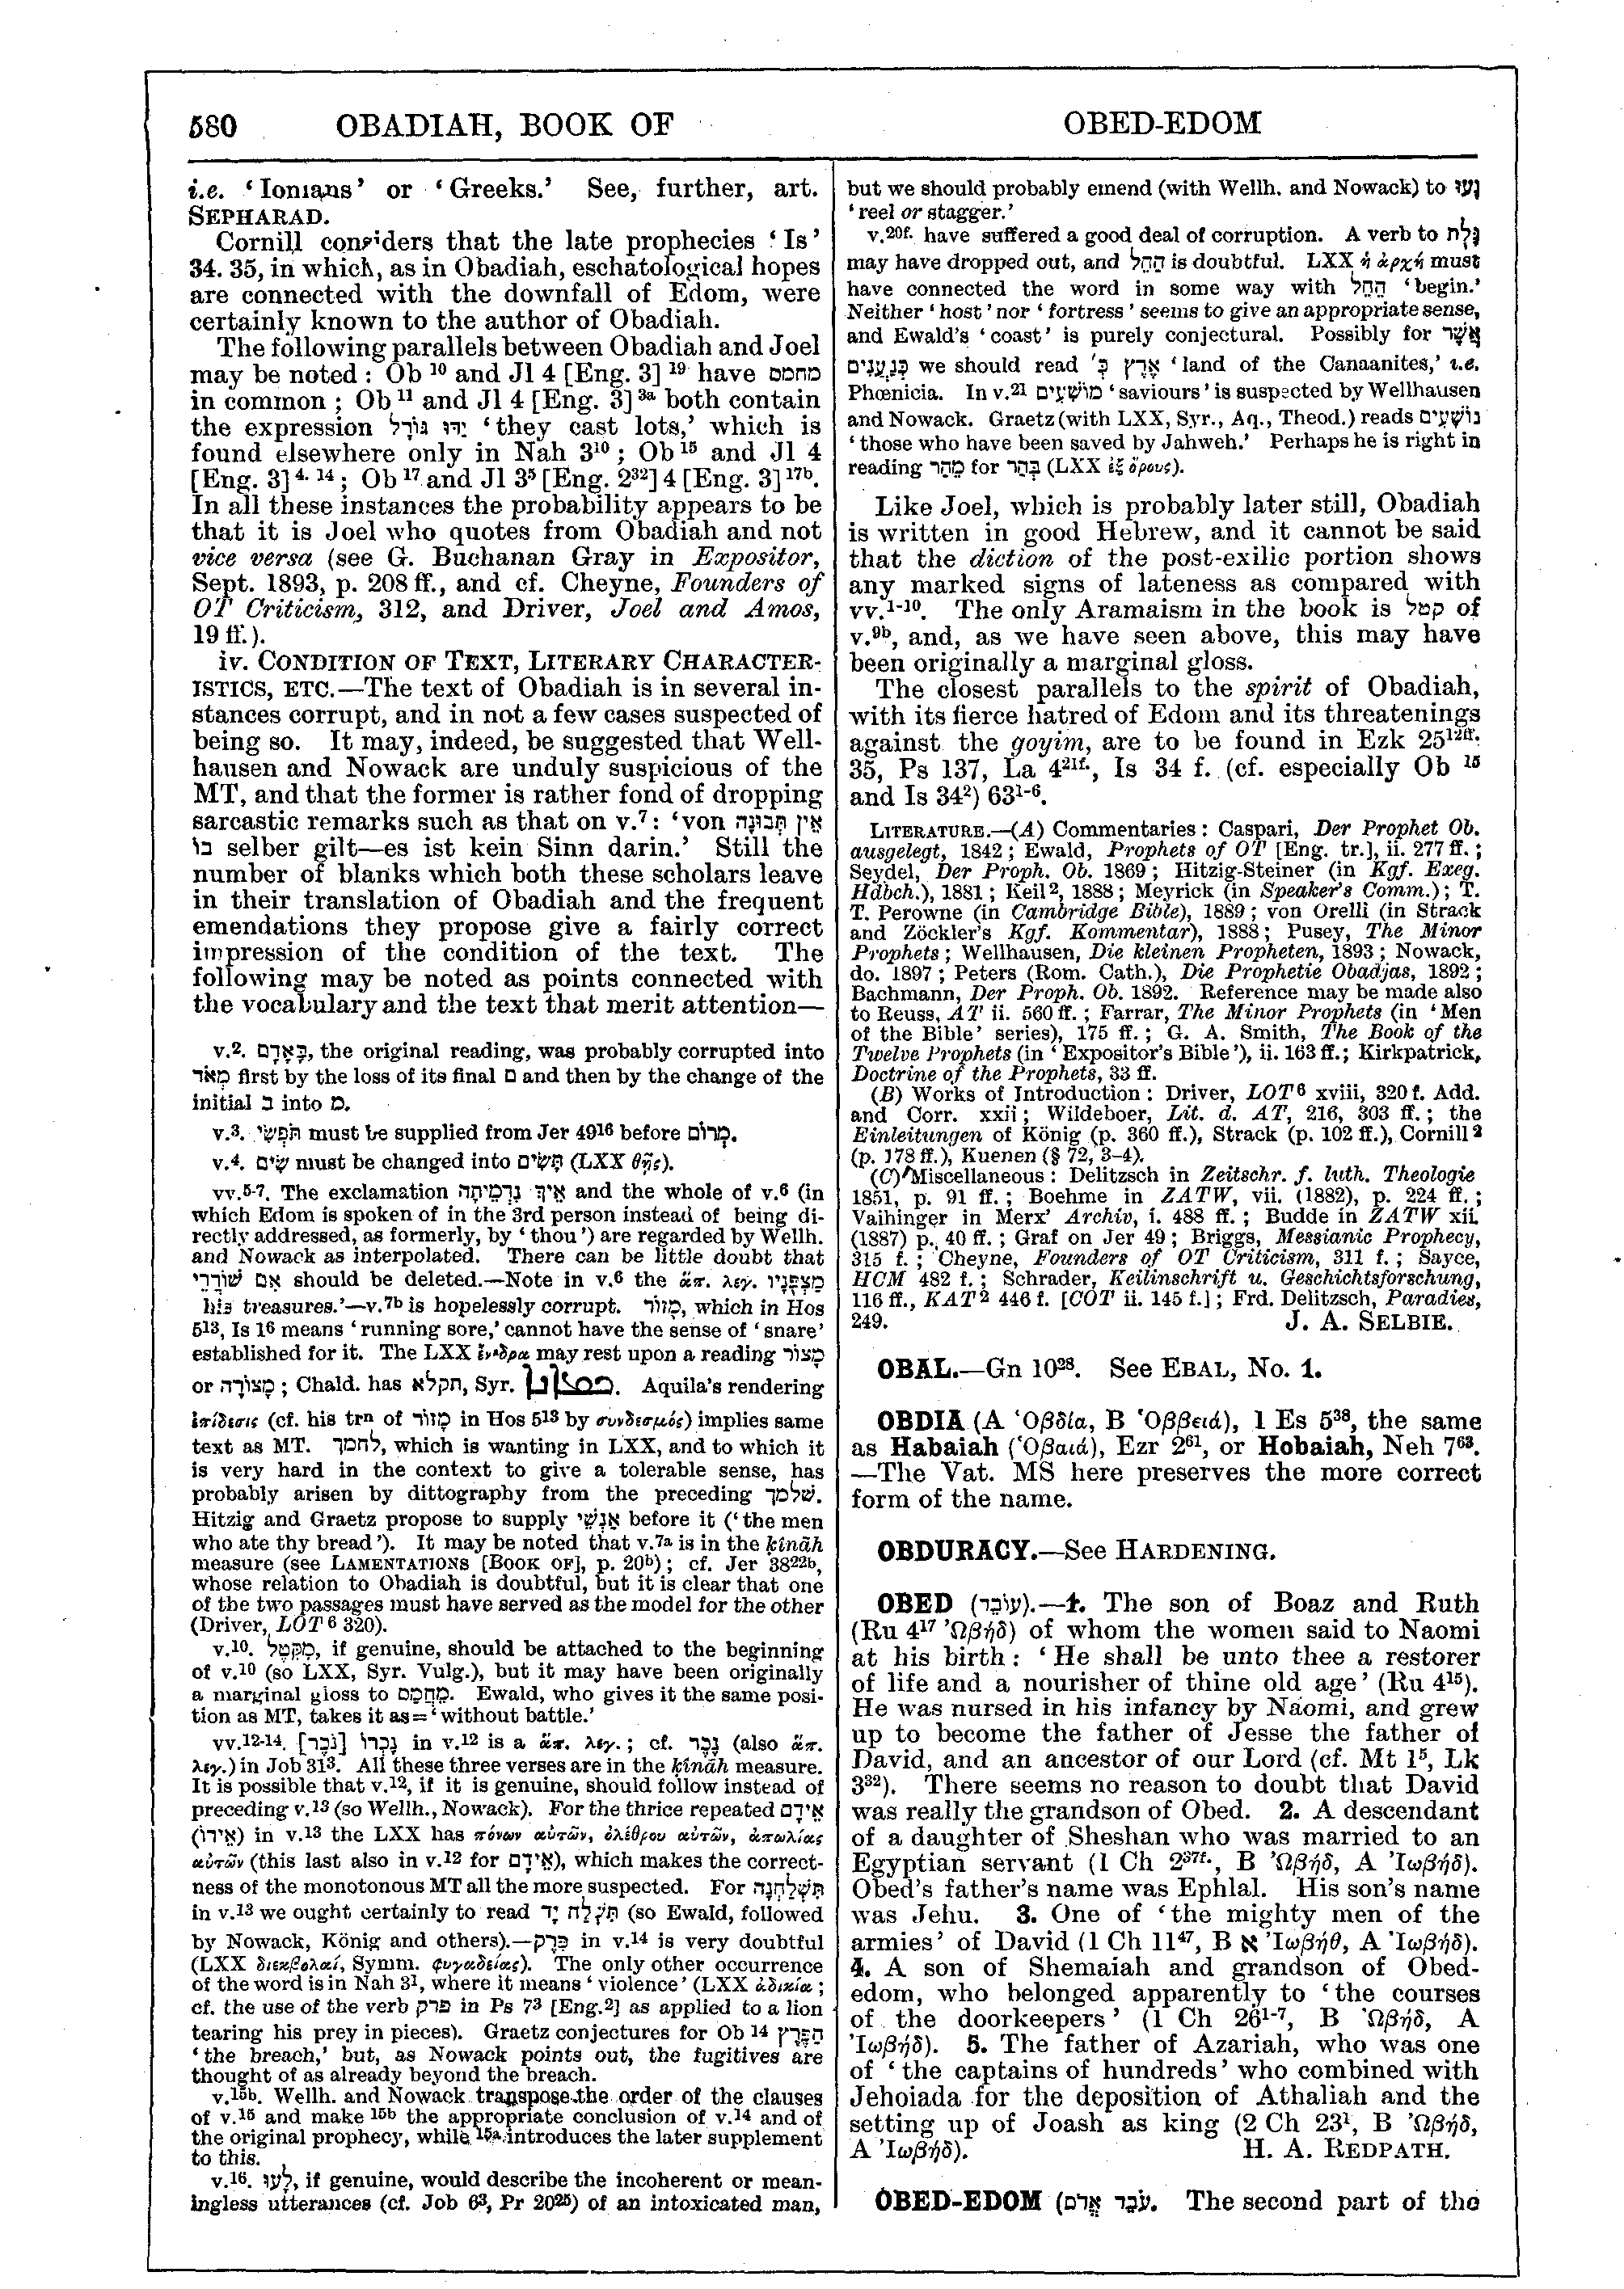 Image of page 580